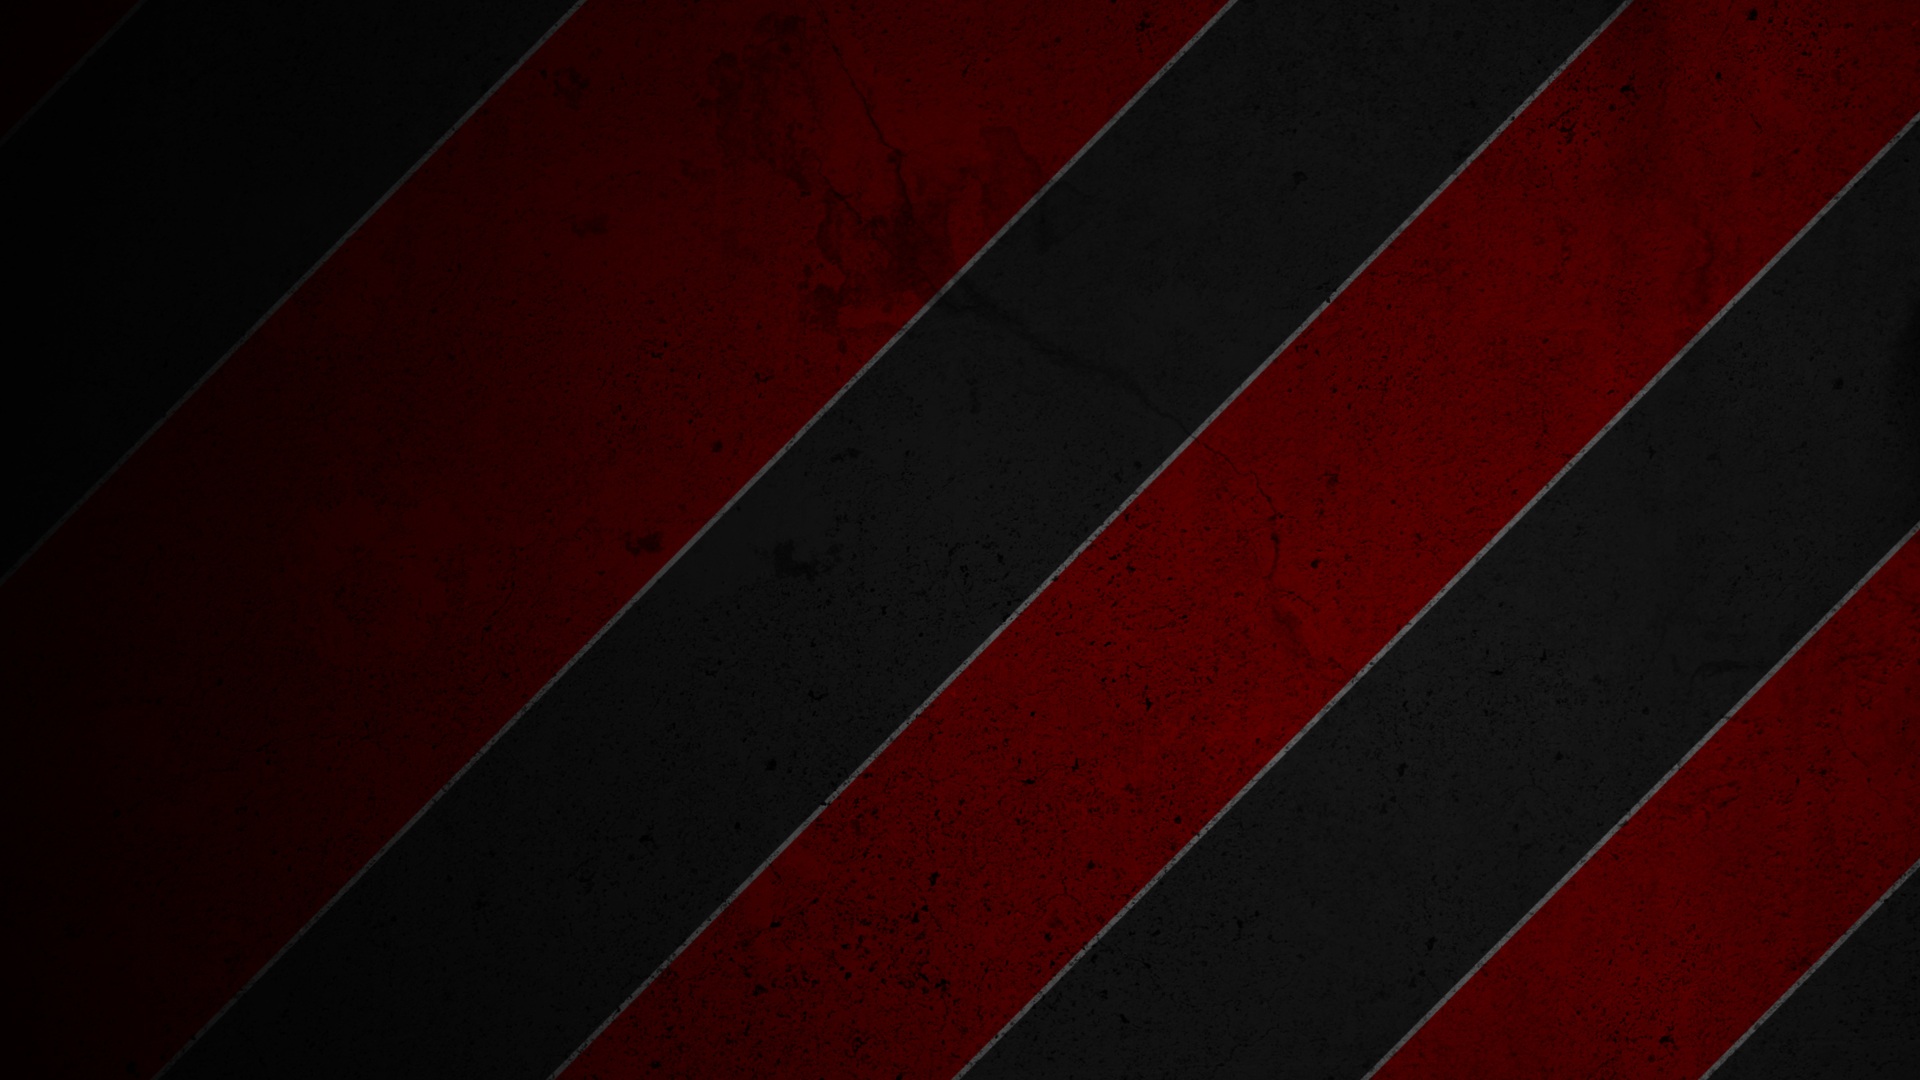 Black and red backgrounds